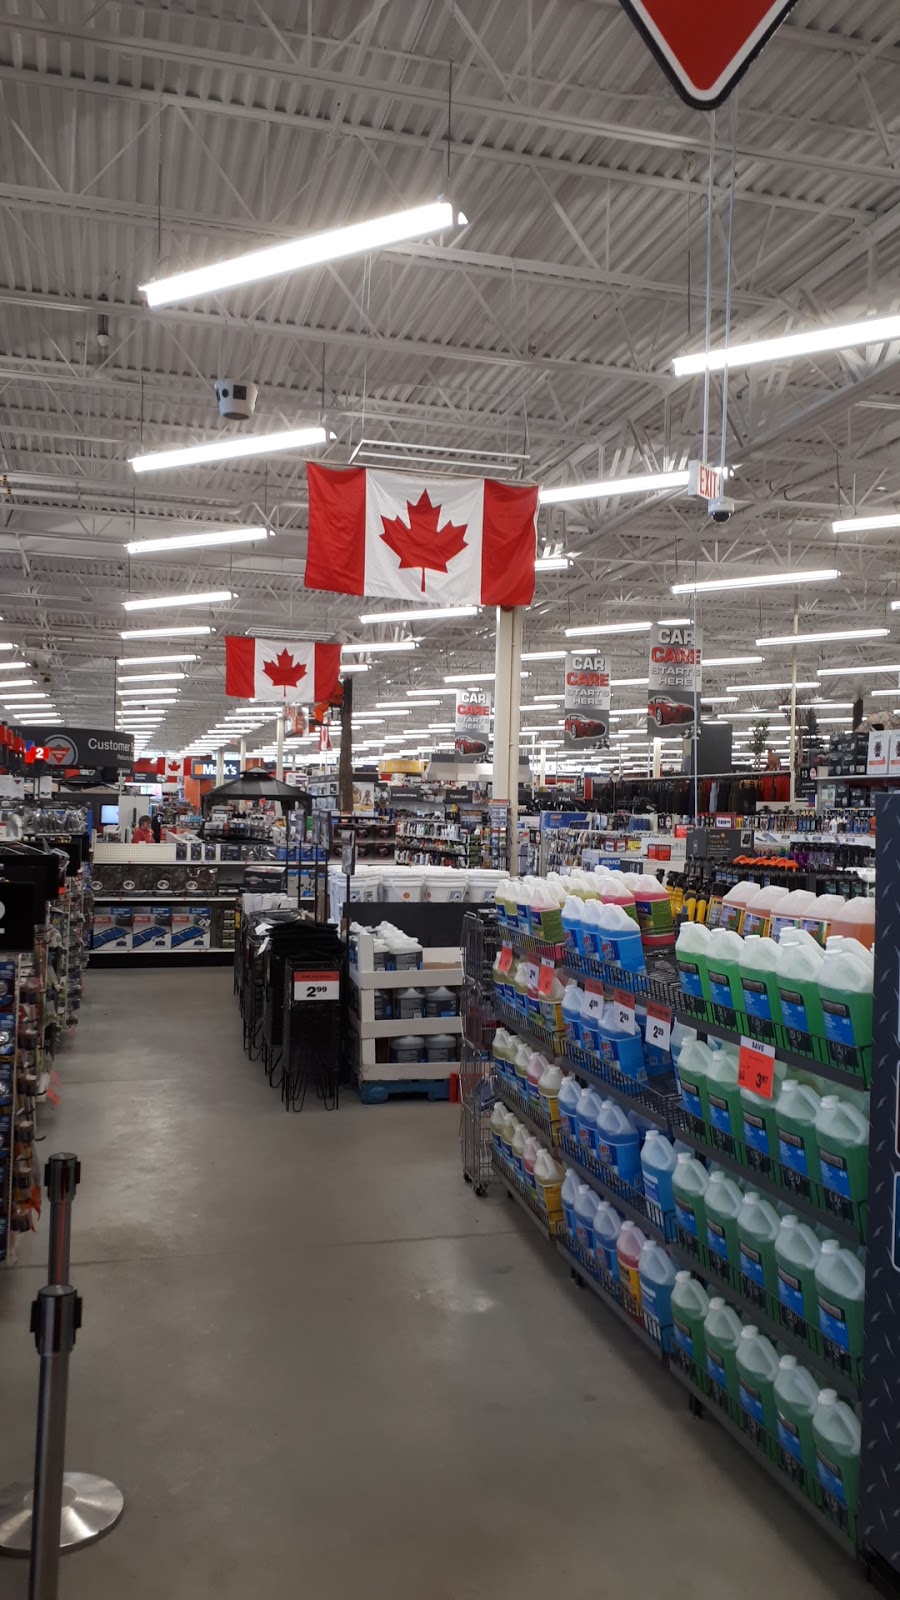 Canadian Tire - Simcoe, ON | department store | 142 Queensway East, Simcoe, ON N3Y 4Y7, Canada | 5194261513 OR +1 519-426-1513